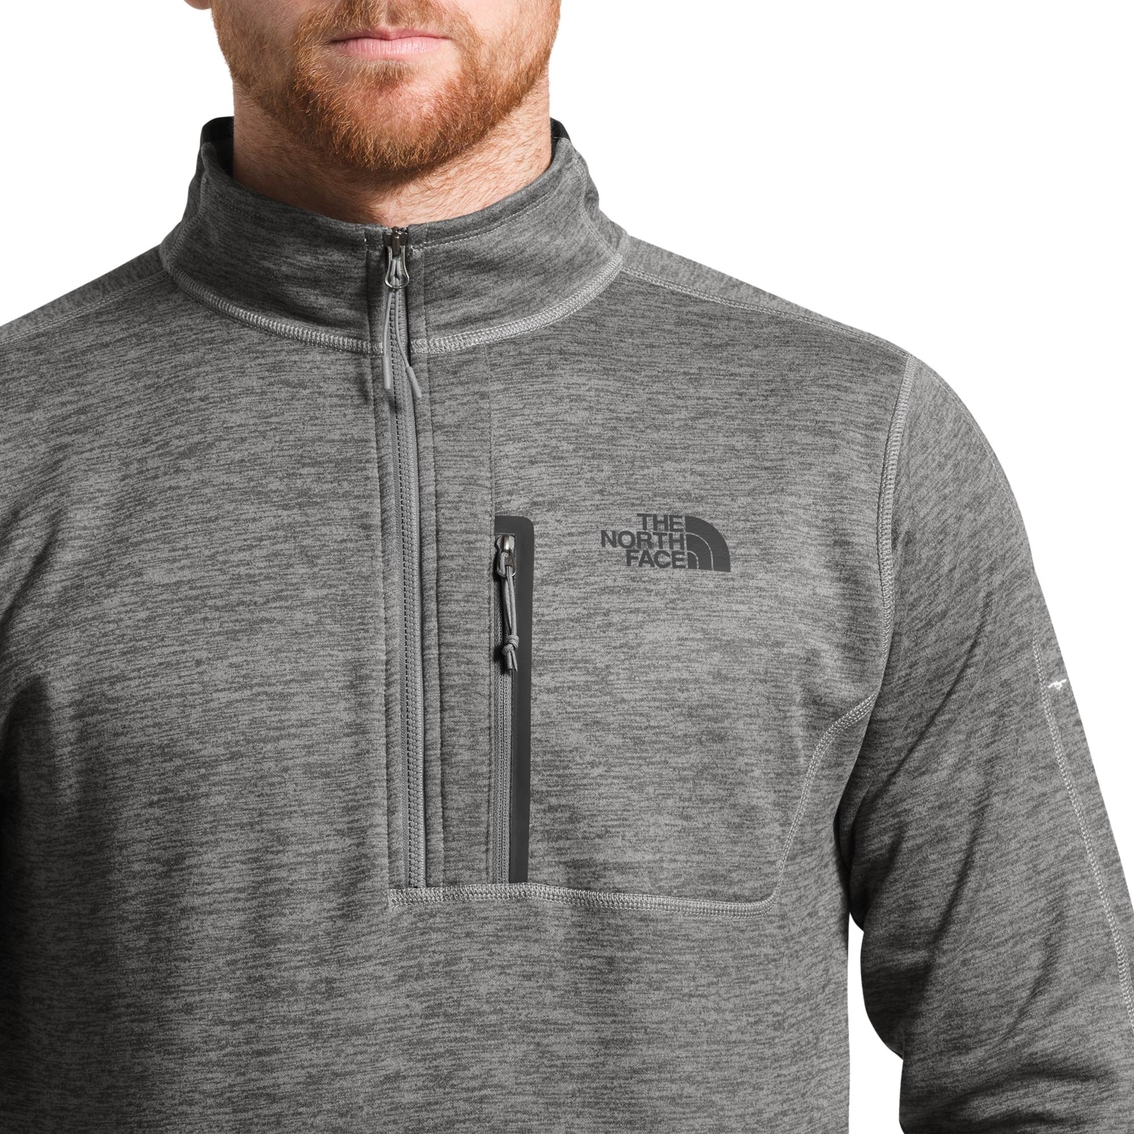 The North Face Canyonlands Half Zip Pullover - Image 3 of 4